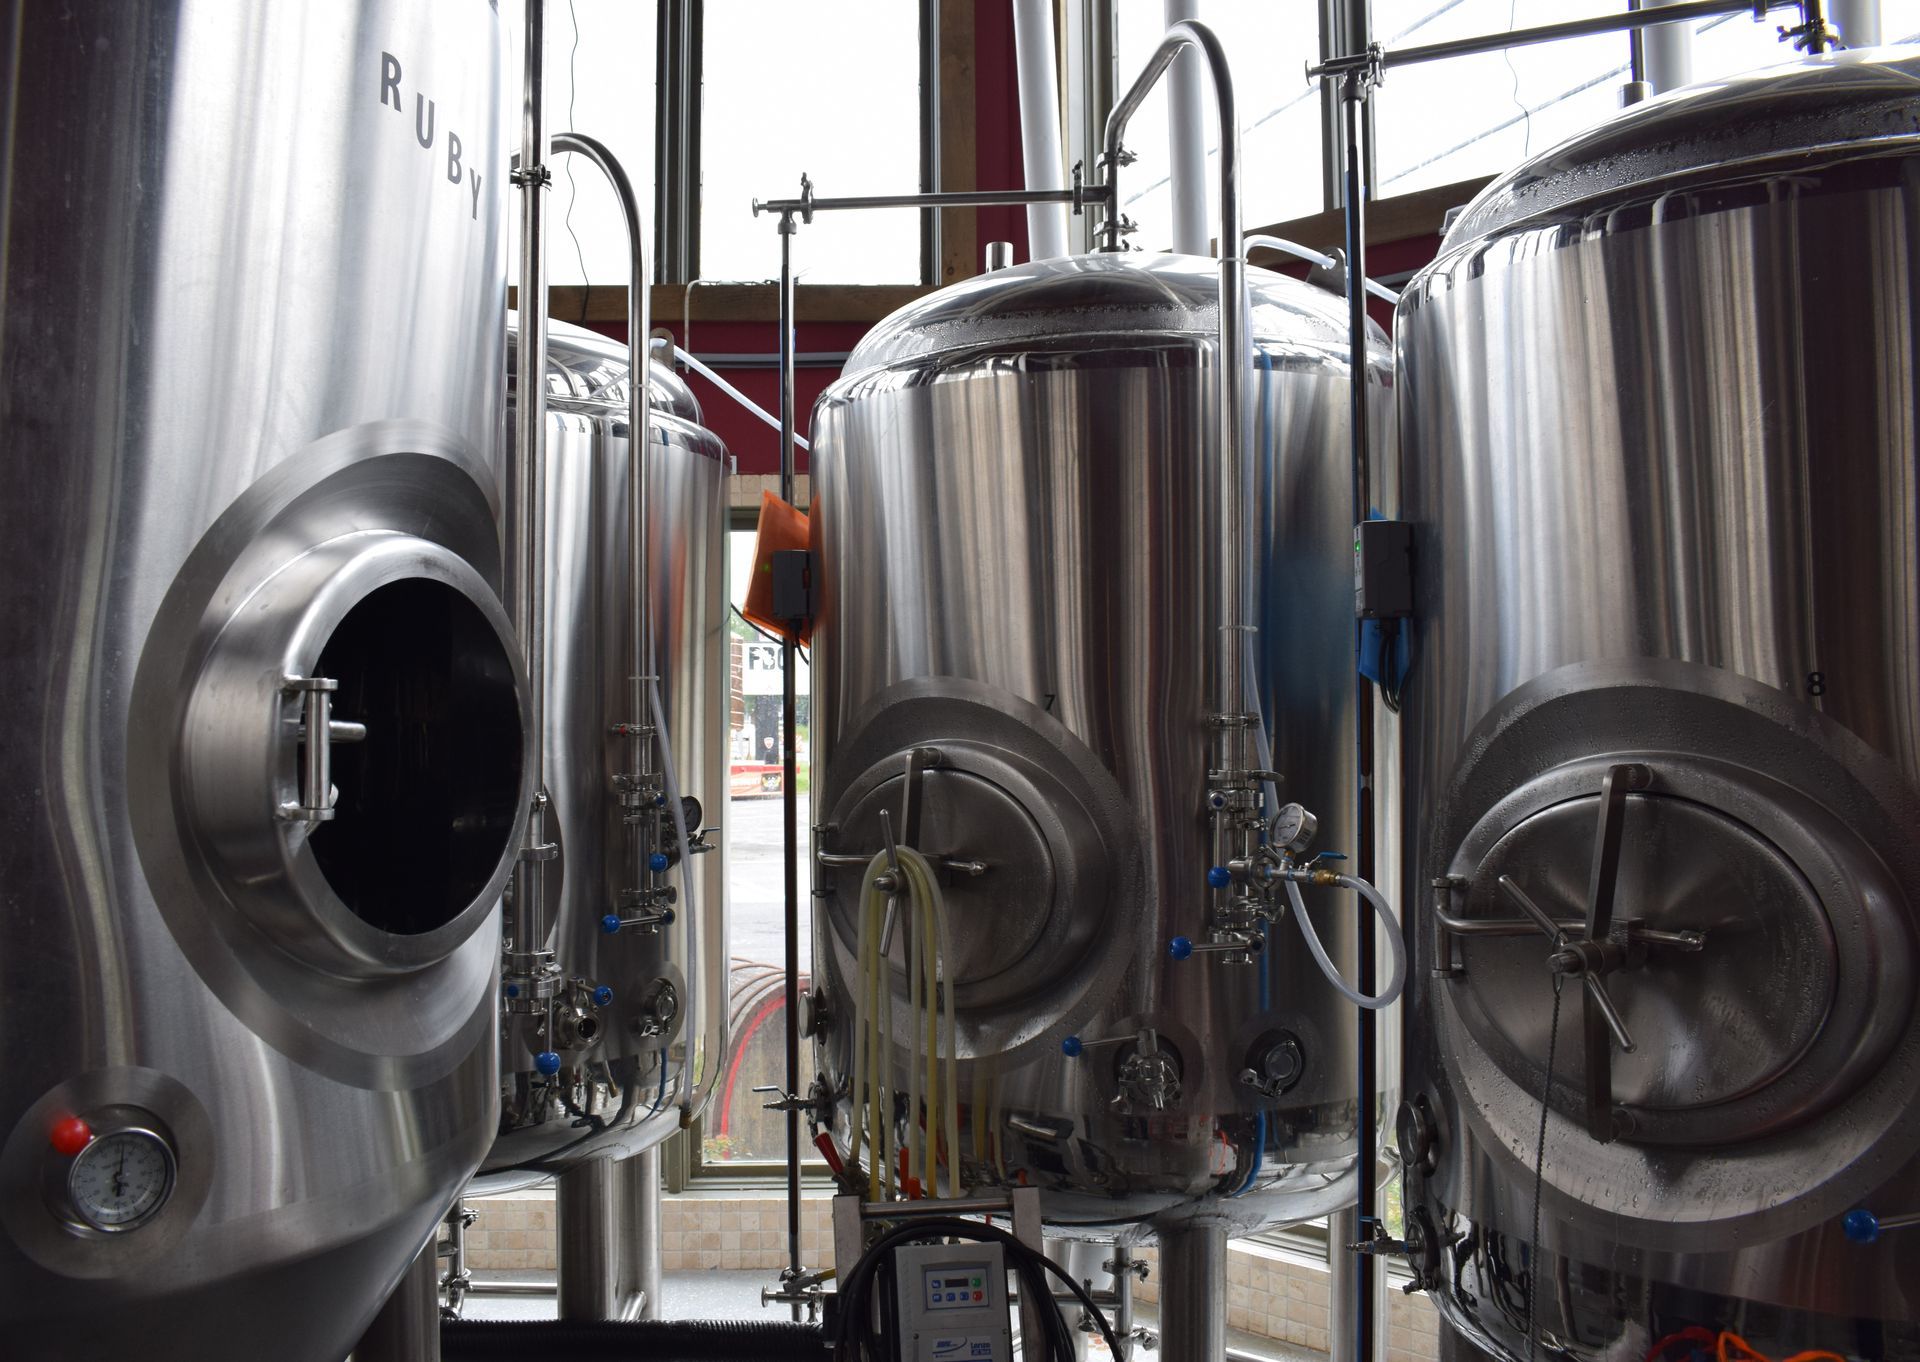 A row of stainless steel tanks in a brewery.